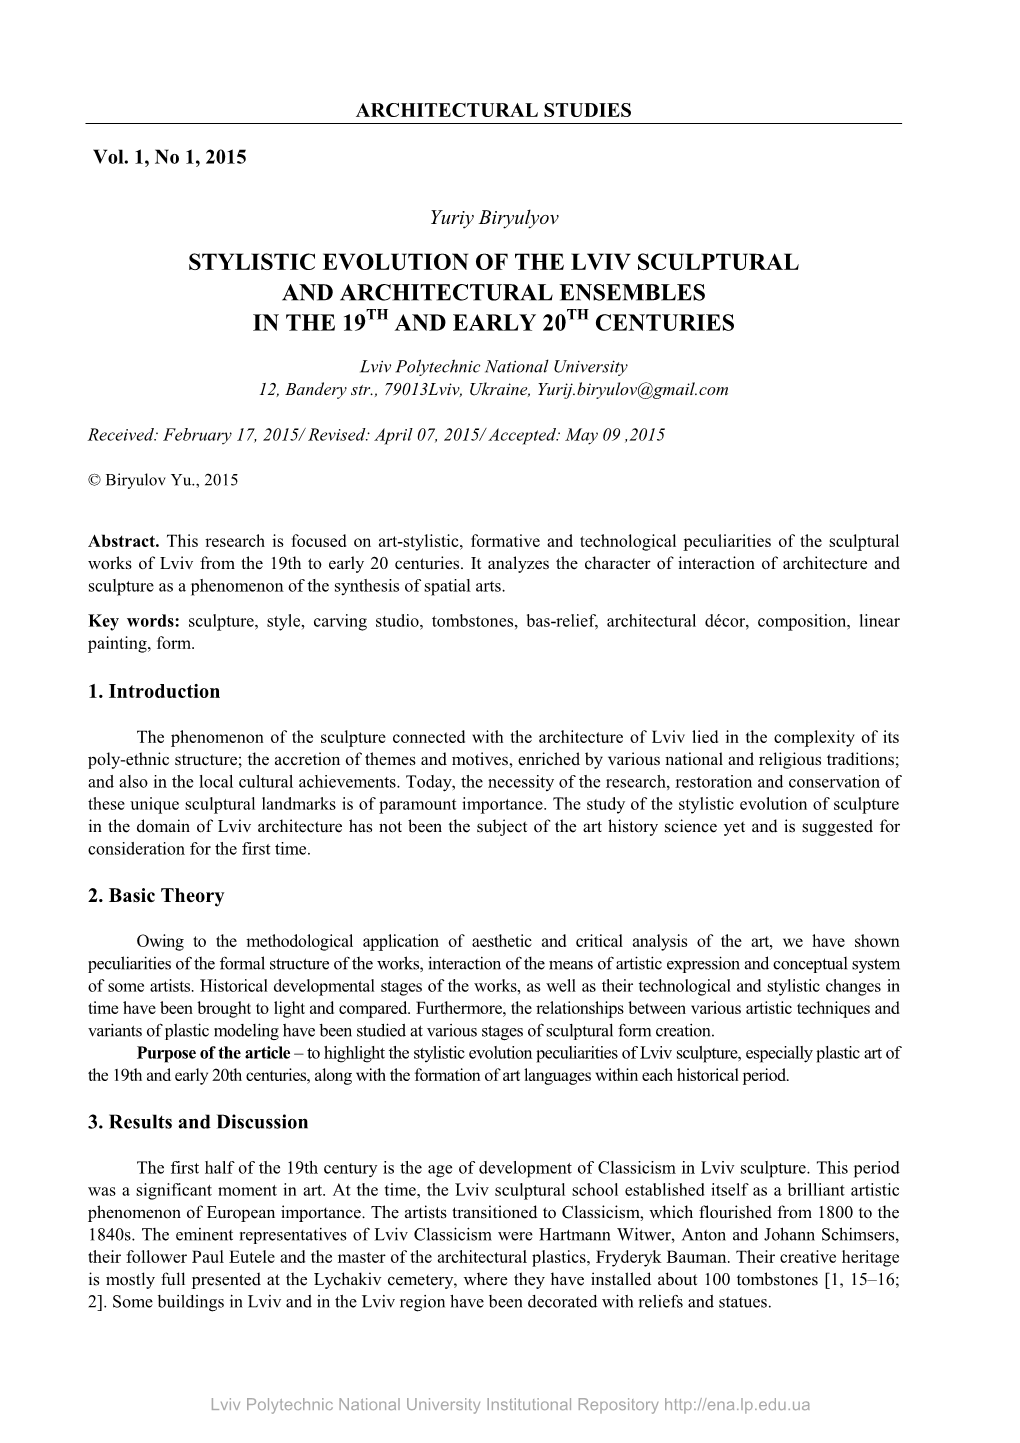 Stylistic Evolution of the Lviv Sculptural and Architectural Ensembles in the 19Th and Early 20Th Centuries